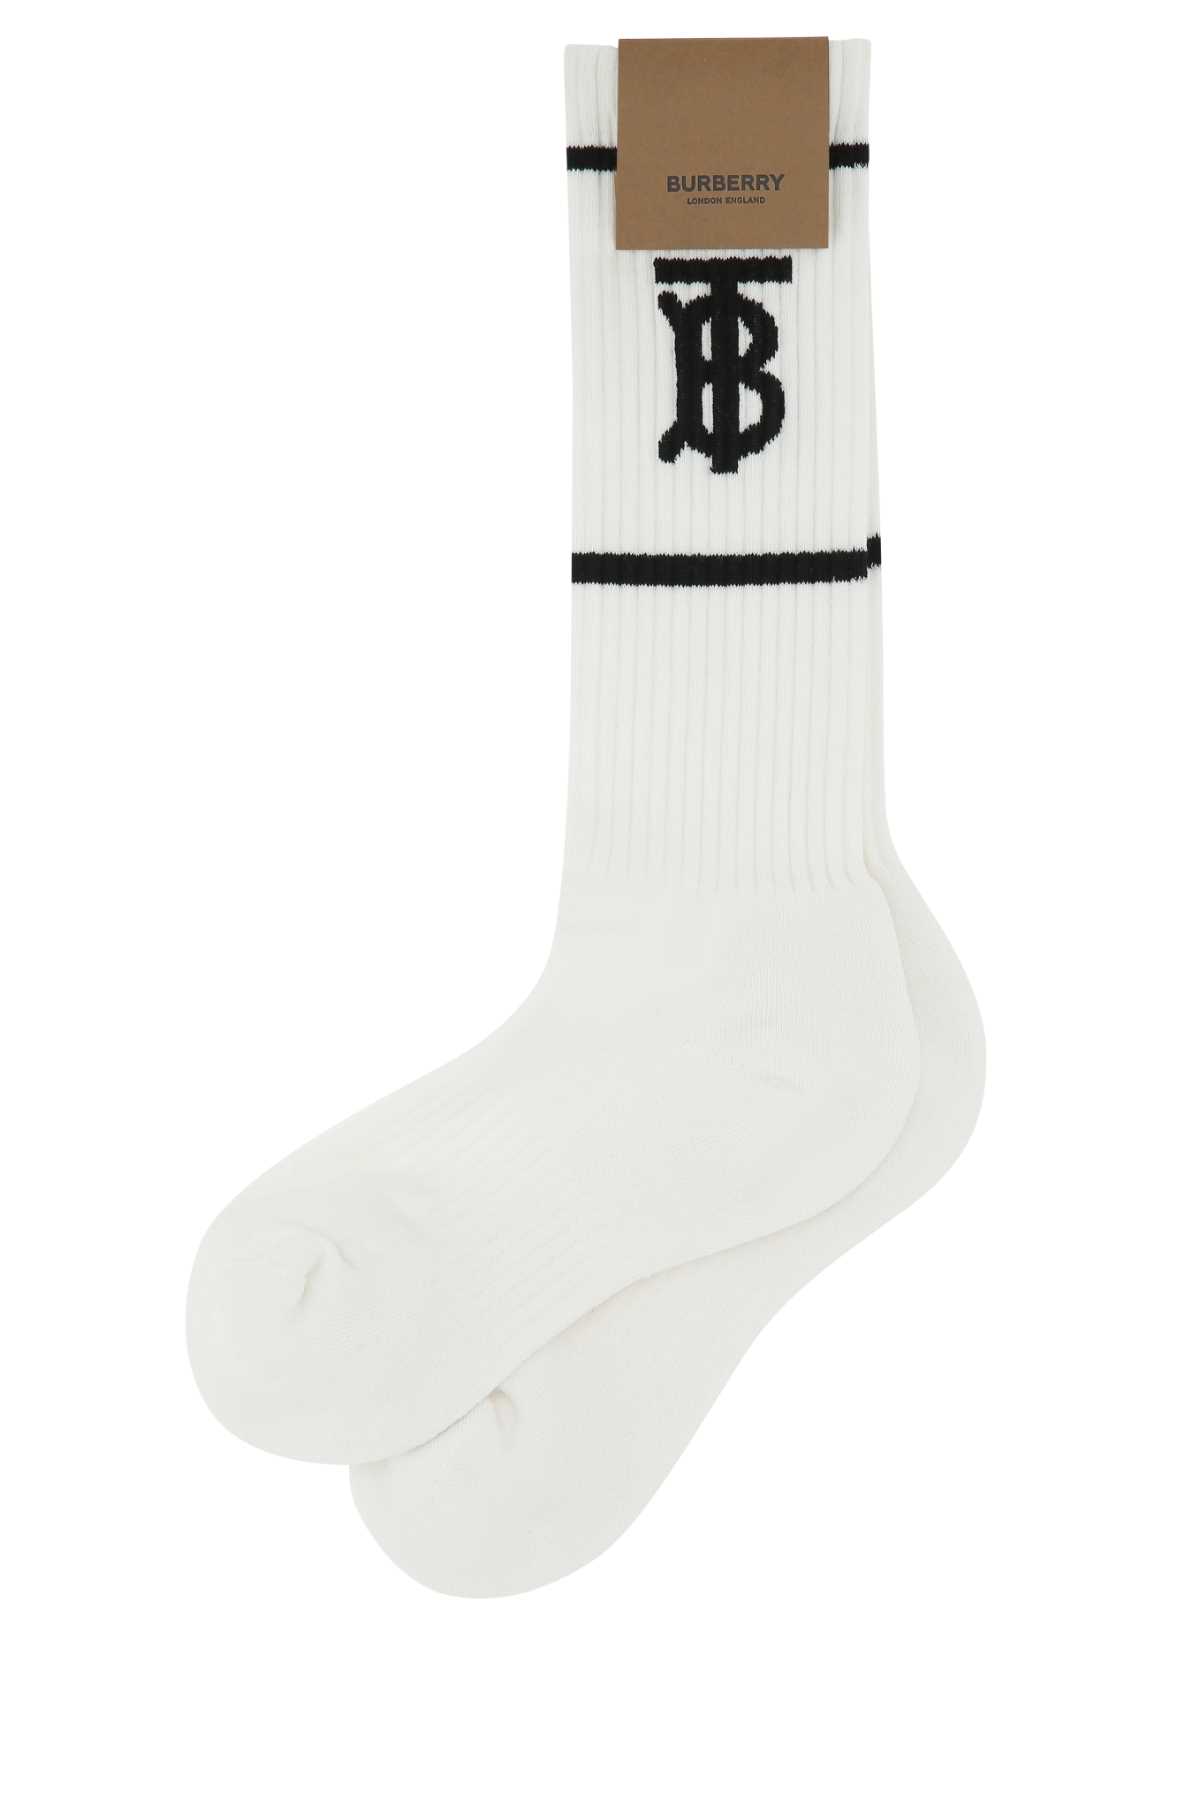 Burberry White Stretch Polyester Blend Socks In A1464